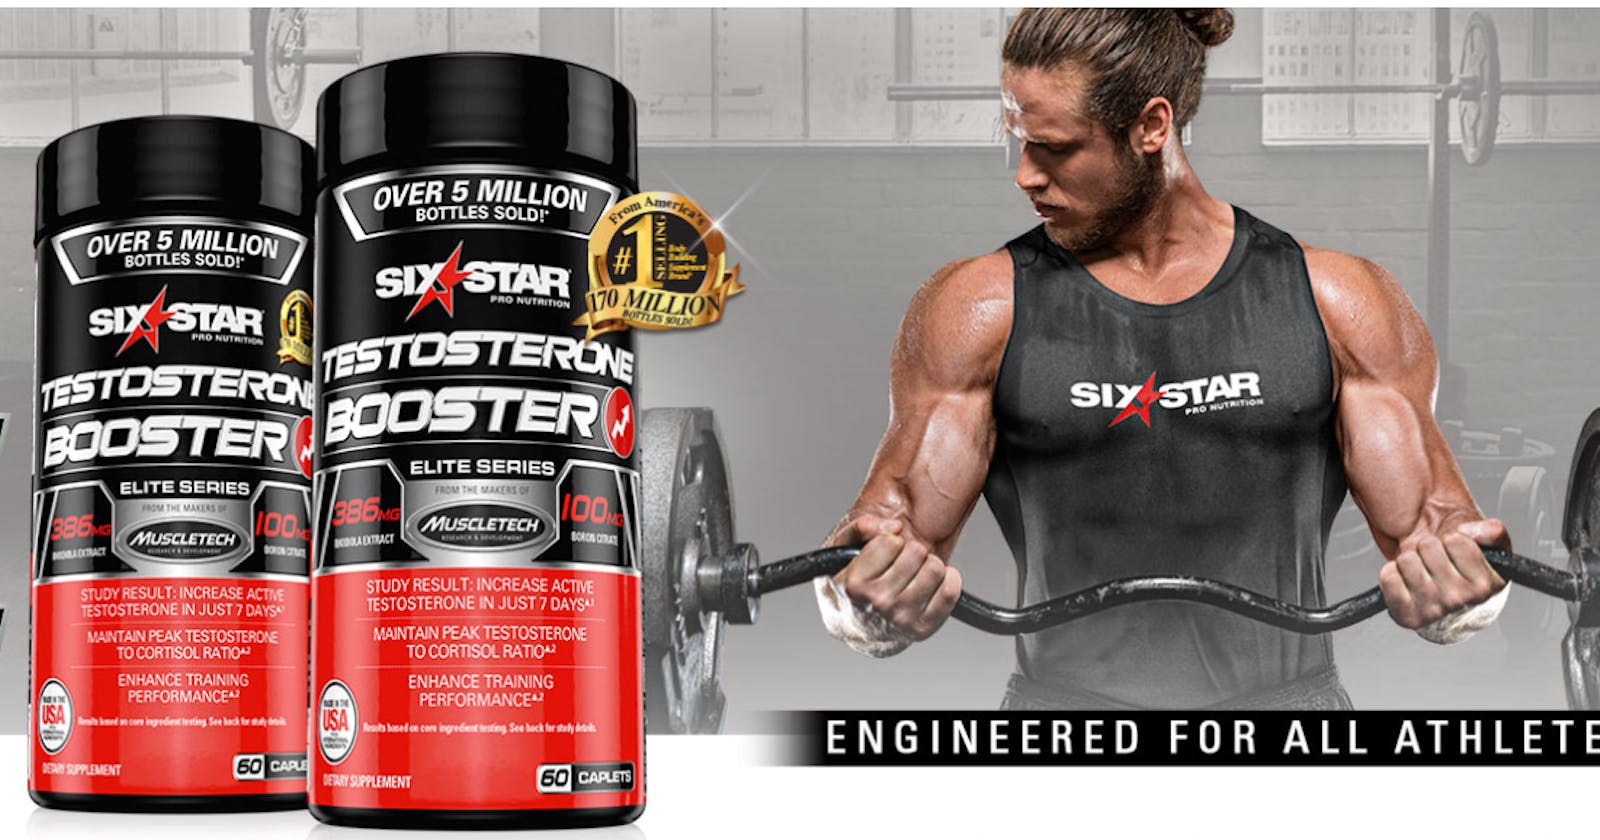 Six Star Testosterone Booster Does It Work?